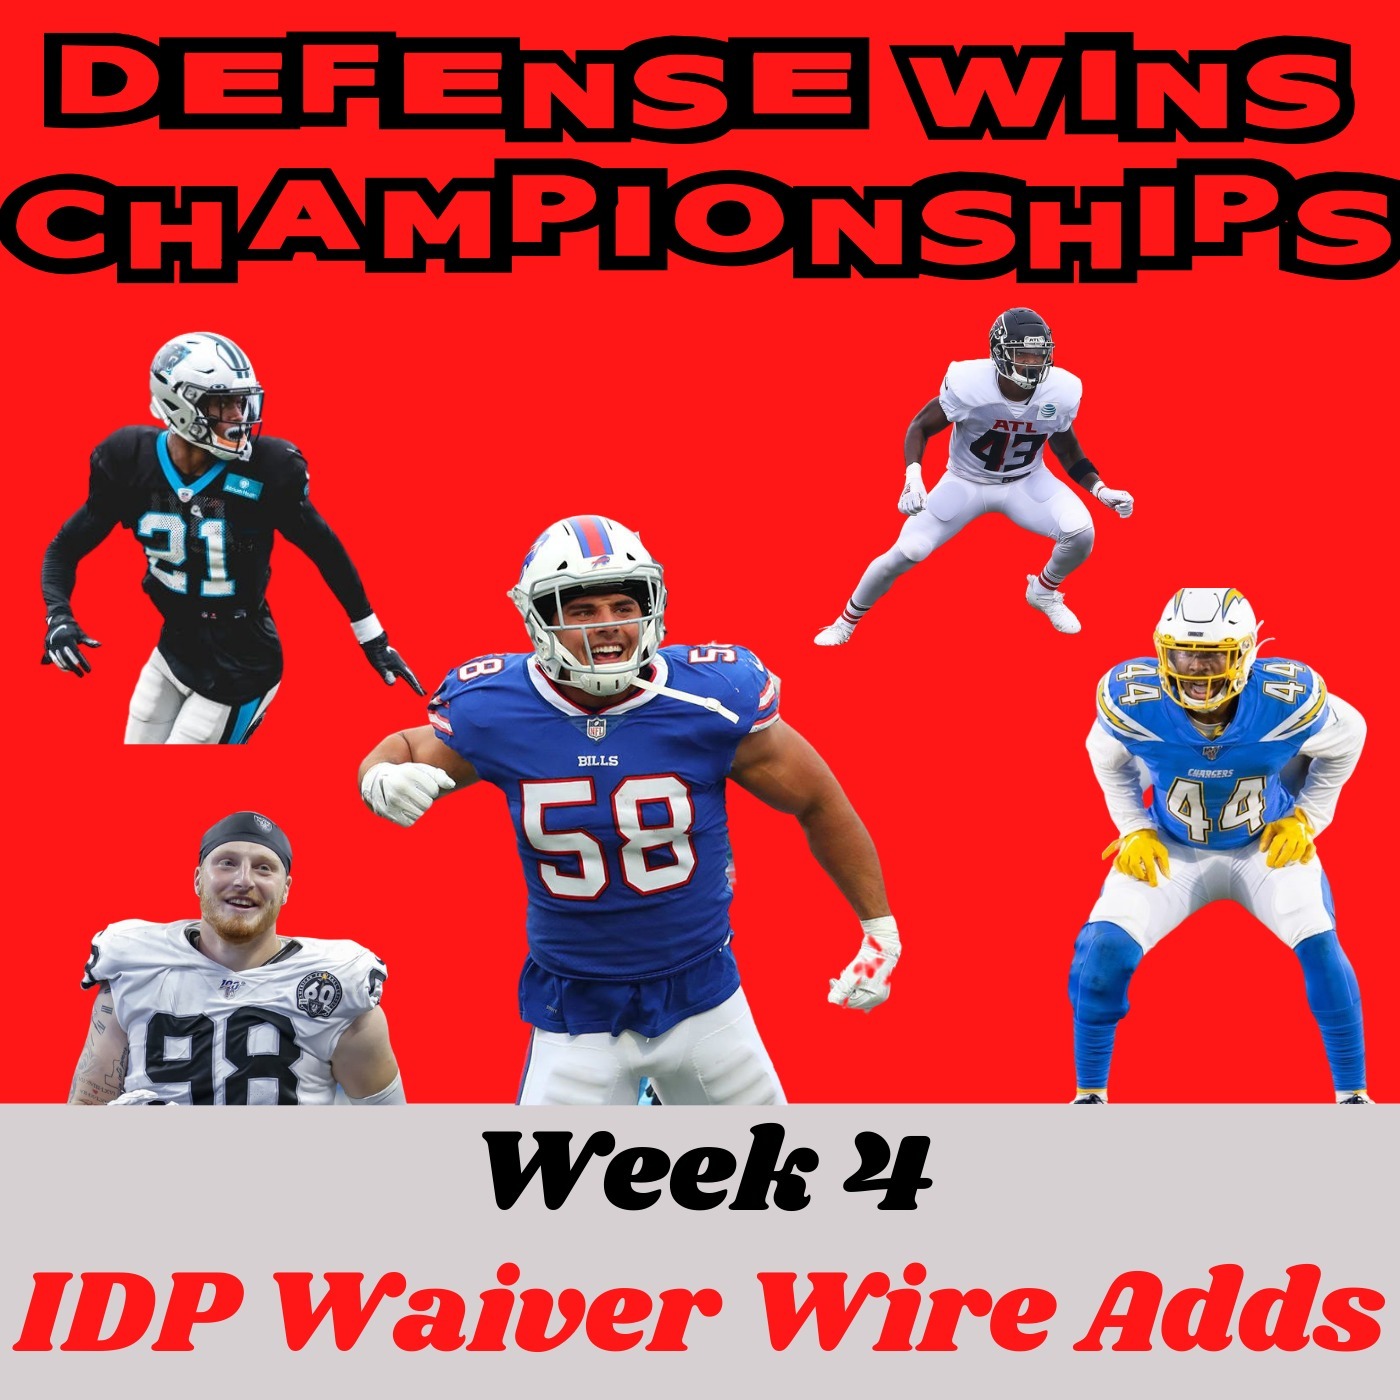 Week 4 IDP Waiver Wire Adds | Defense Wins Championships Image